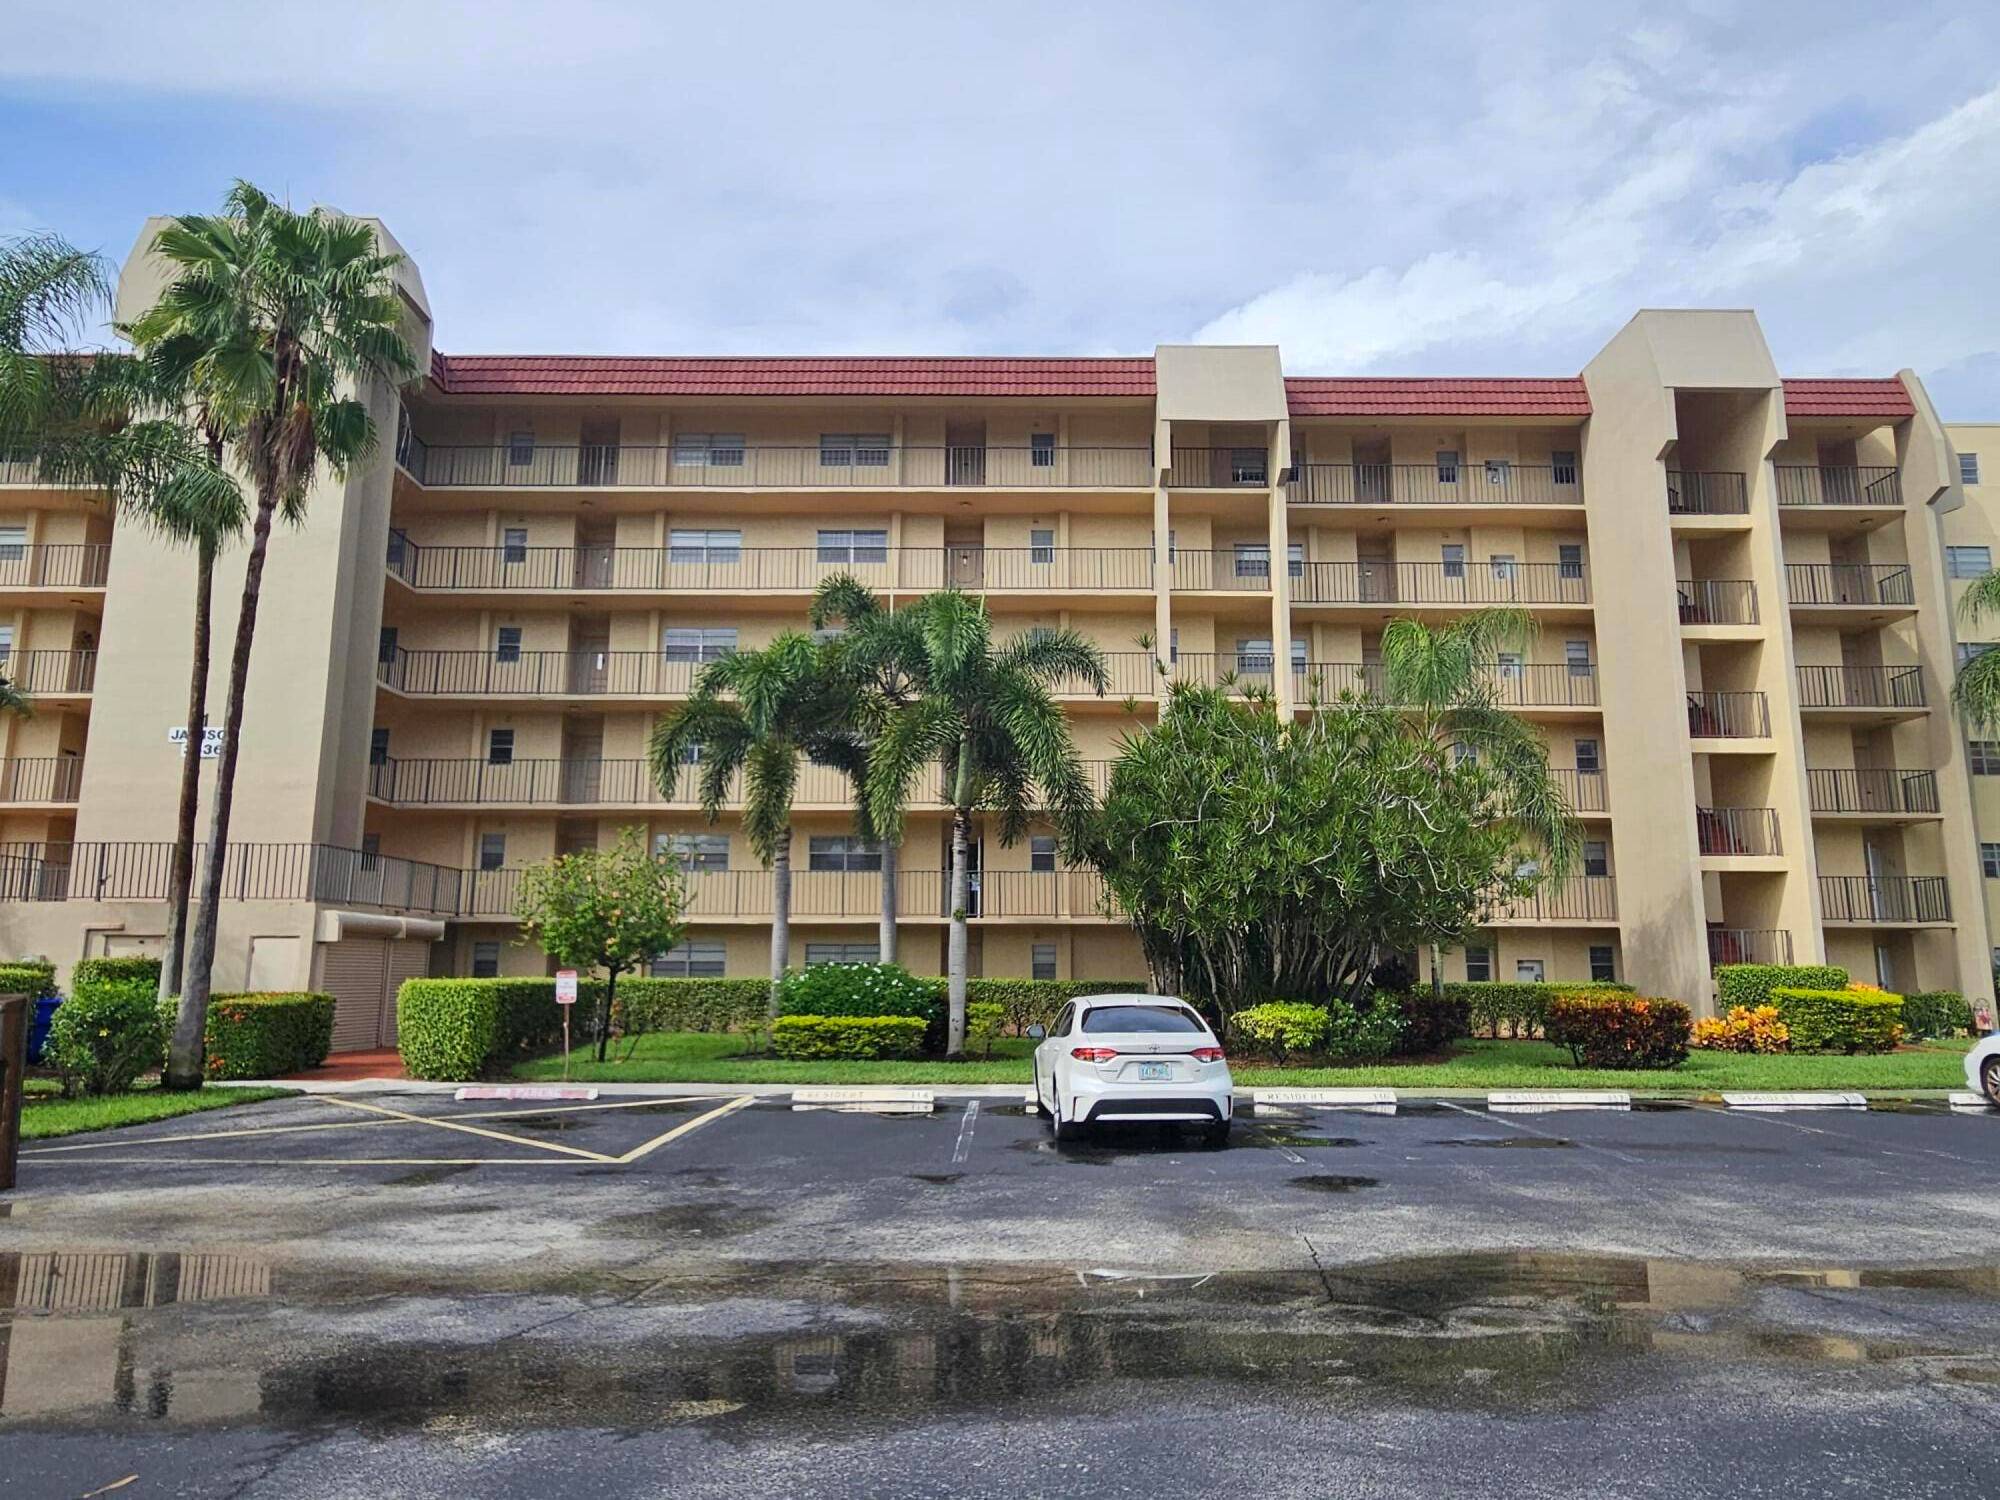 Spectacular penthouse condo, expansive views from your 25' long balcony overlooking the golf course Balcony access from Living room, Master bedroom kitchen This condo was completely remodeled including kitchens, baths, ...